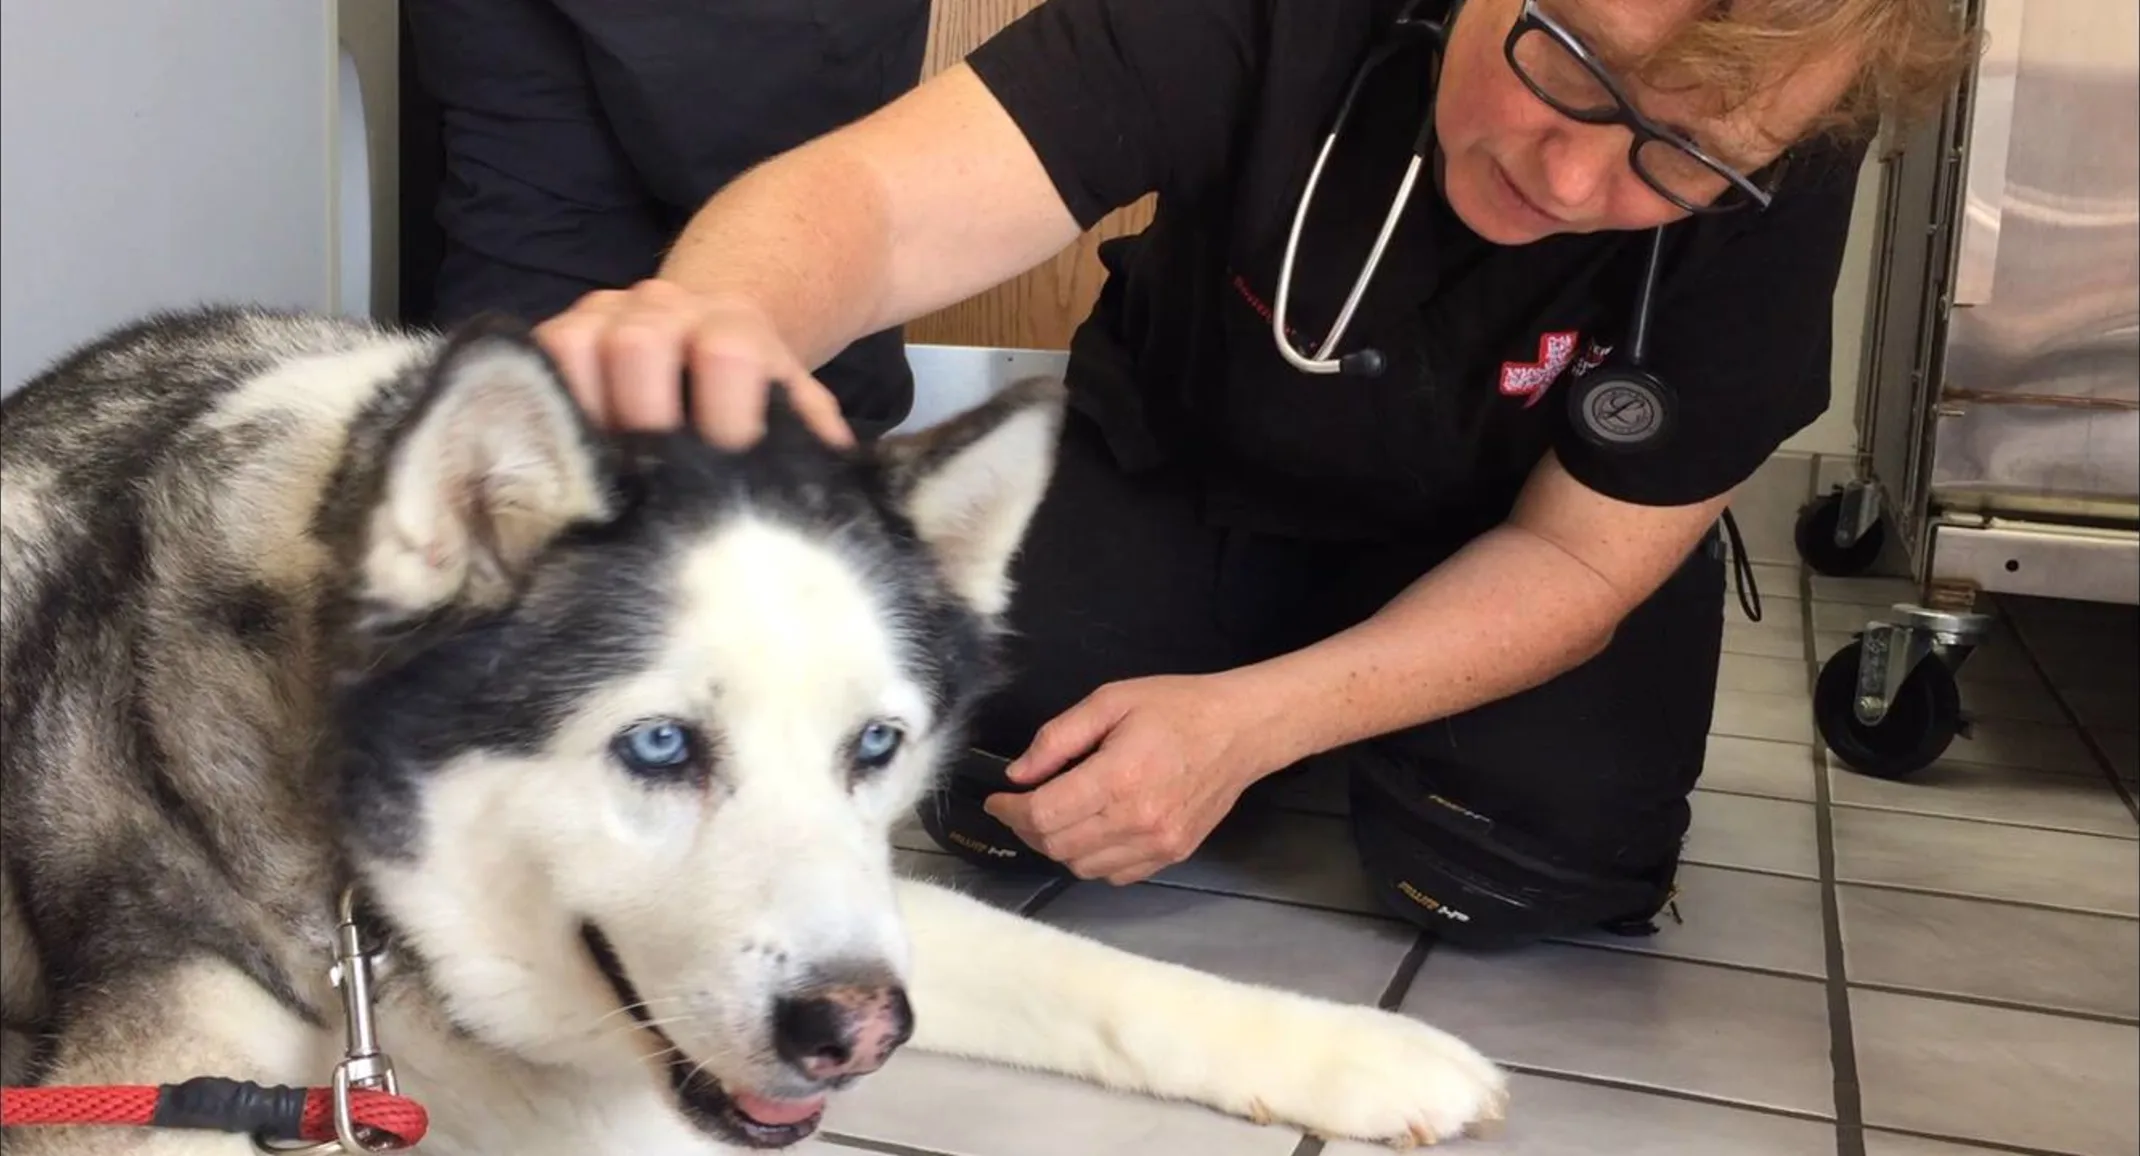 Staff with patient Bella the husky